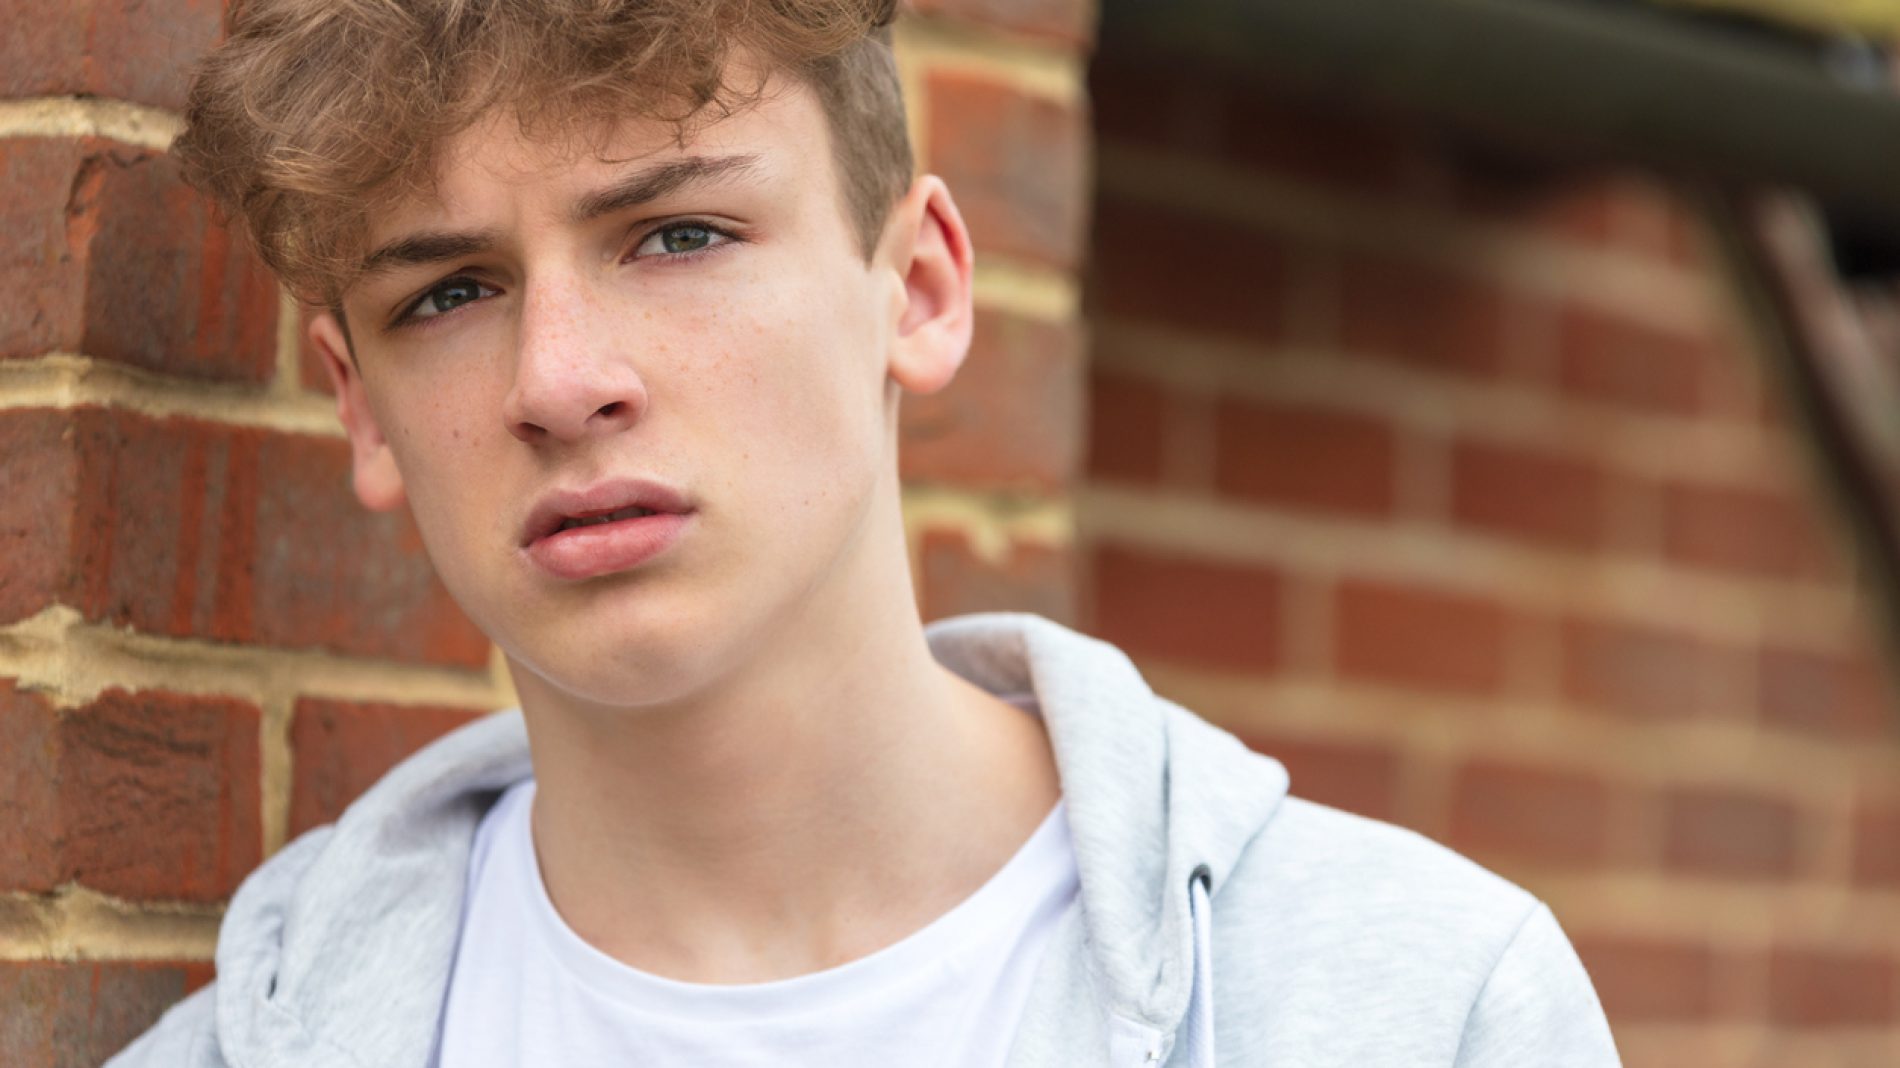 Serious male boy teenager outside leaning on brick wall wearing a gray hoody